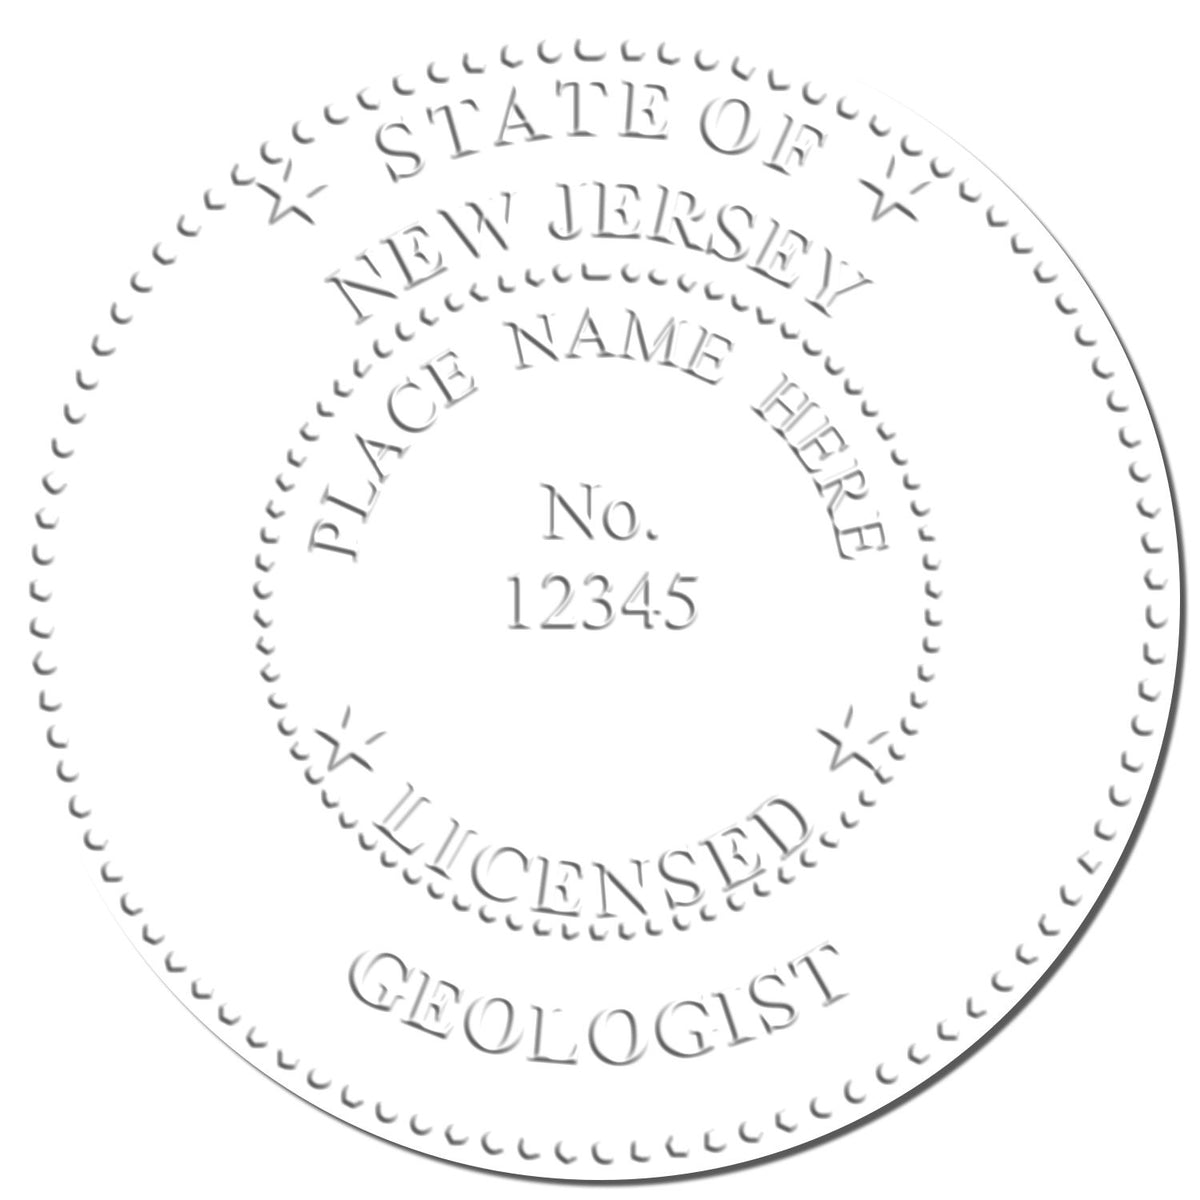 A photograph of the State of New Jersey Extended Long Reach Geologist Seal stamp impression reveals a vivid, professional image of the on paper.